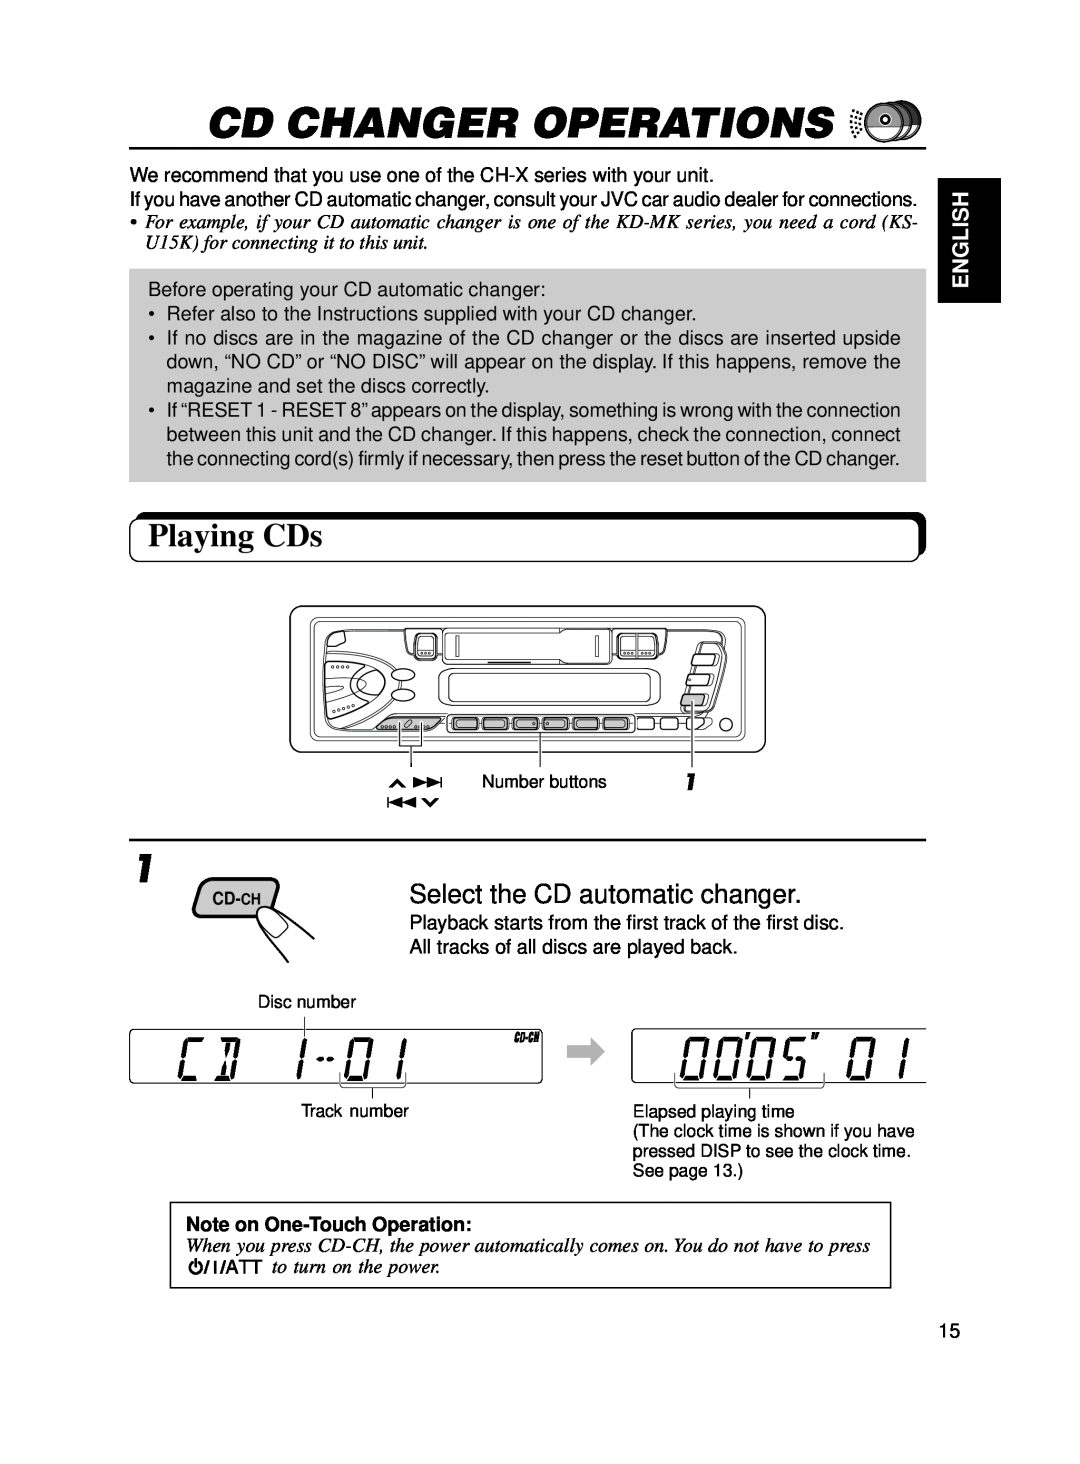 JVC KS-FX12 Cd Changer Operations, Playing CDs, Select the CD automatic changer, English, Note on One-Touch Operation 